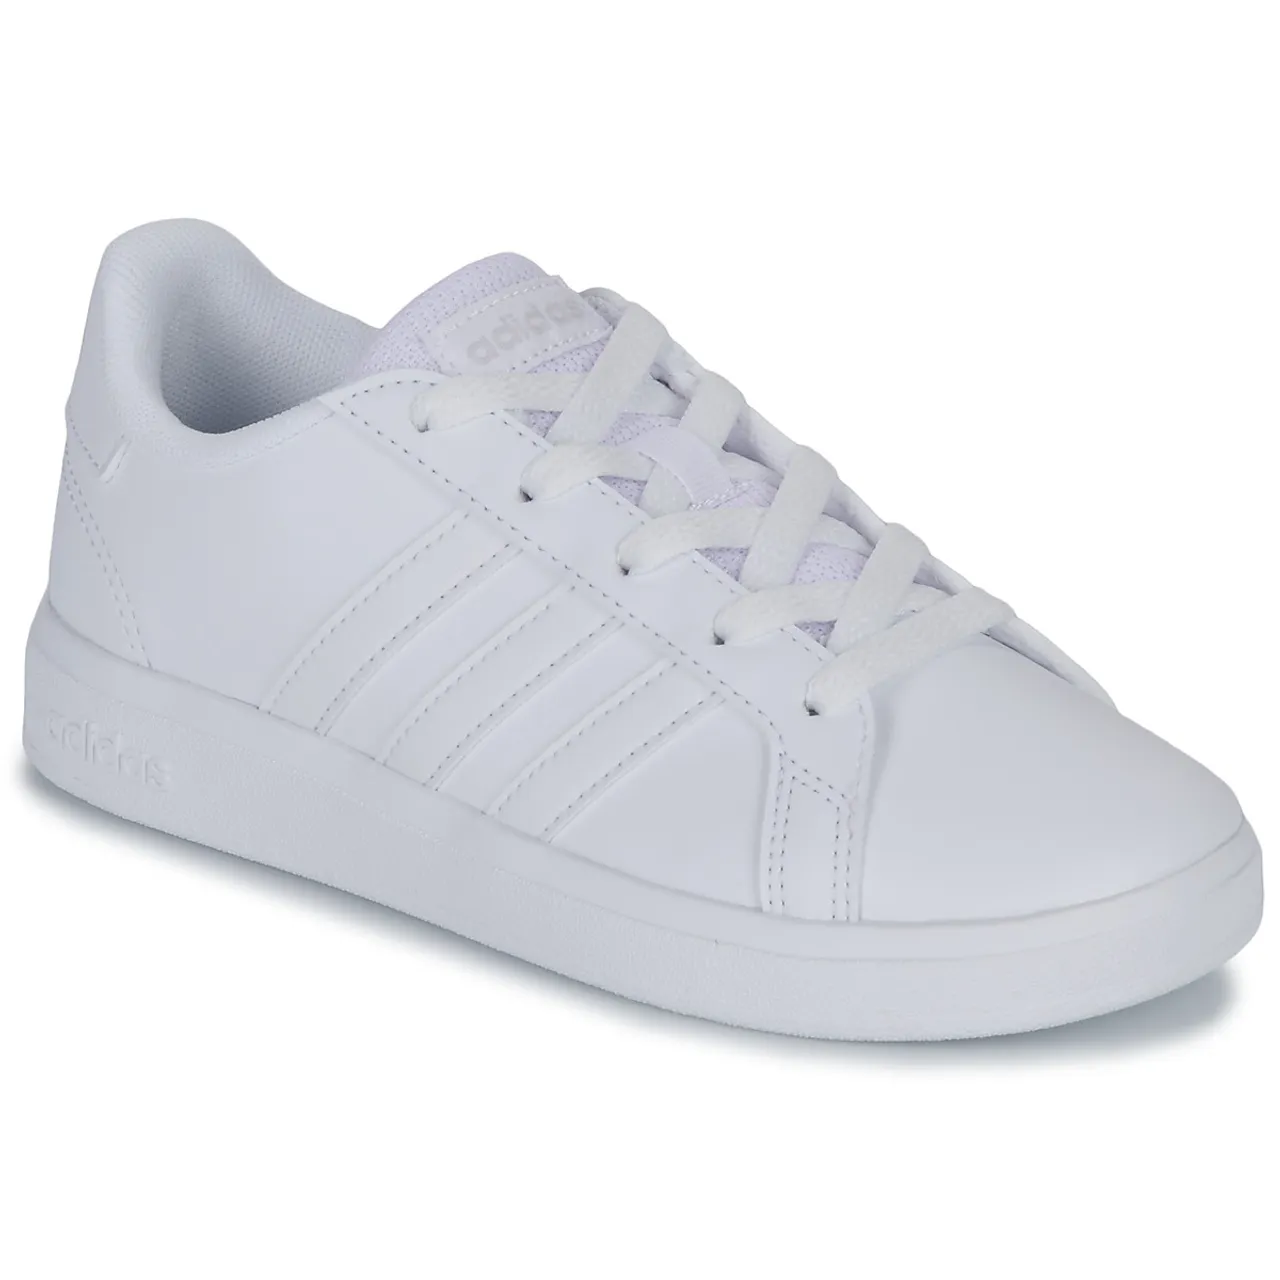 adidas  GRAND COURT 2.0 K  boys's Children's Shoes (Trainers) in White